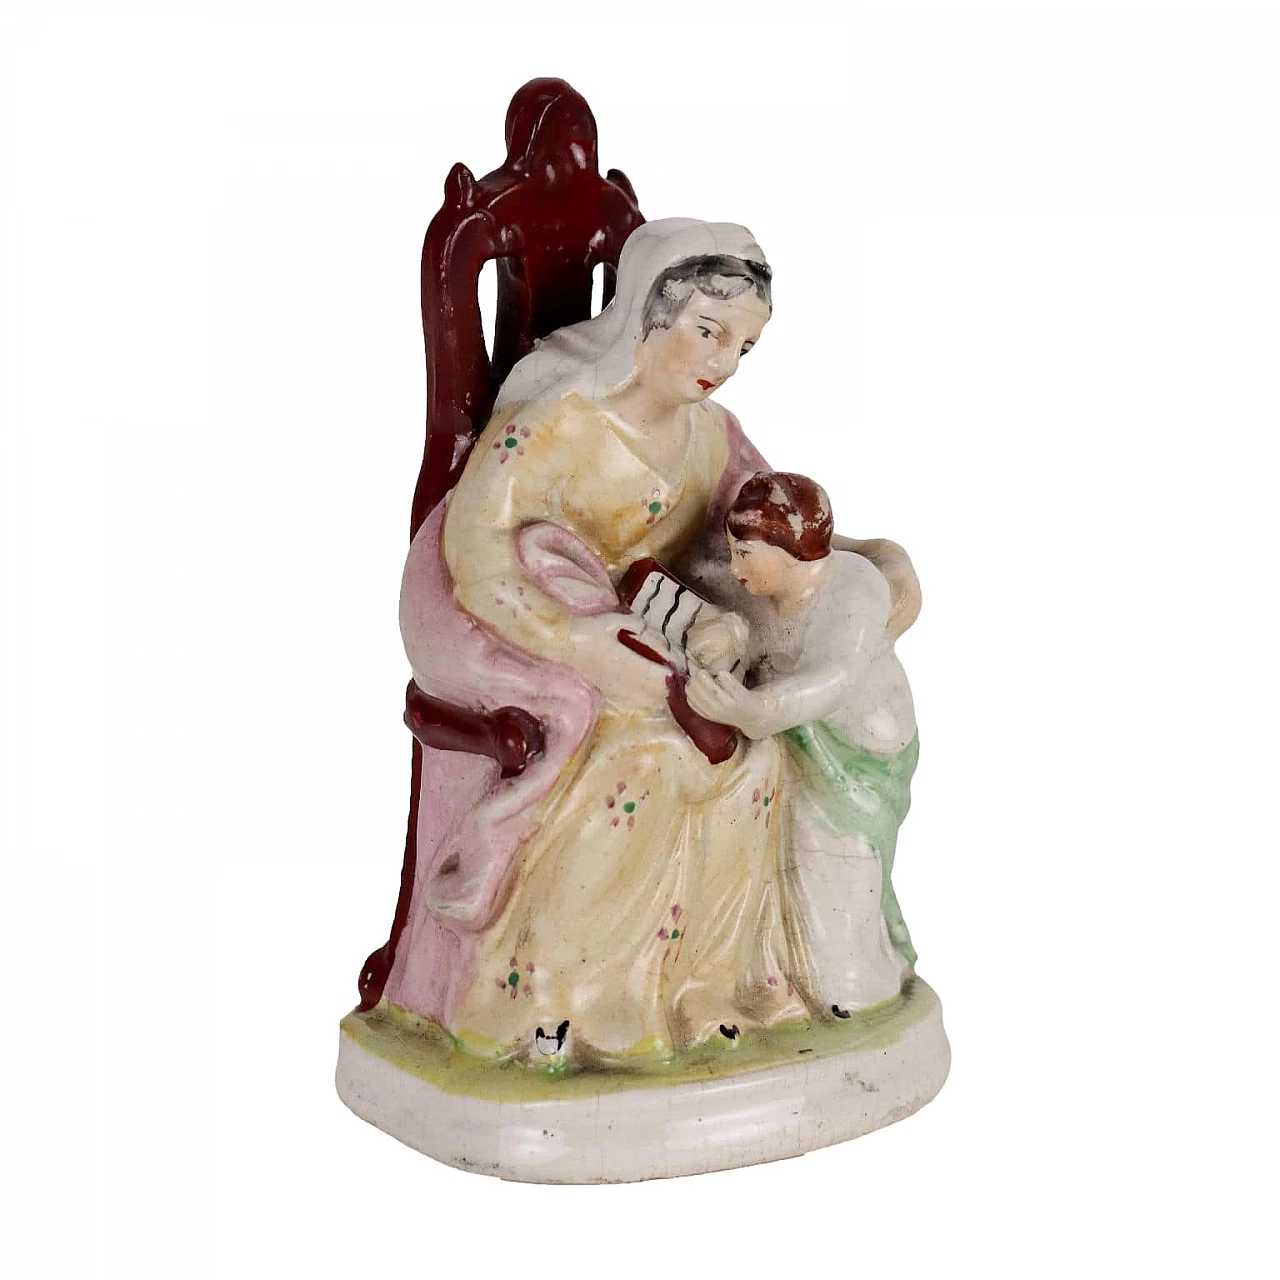 Woman and child, sculpture in Staffordshire porcelain, 19th century 1